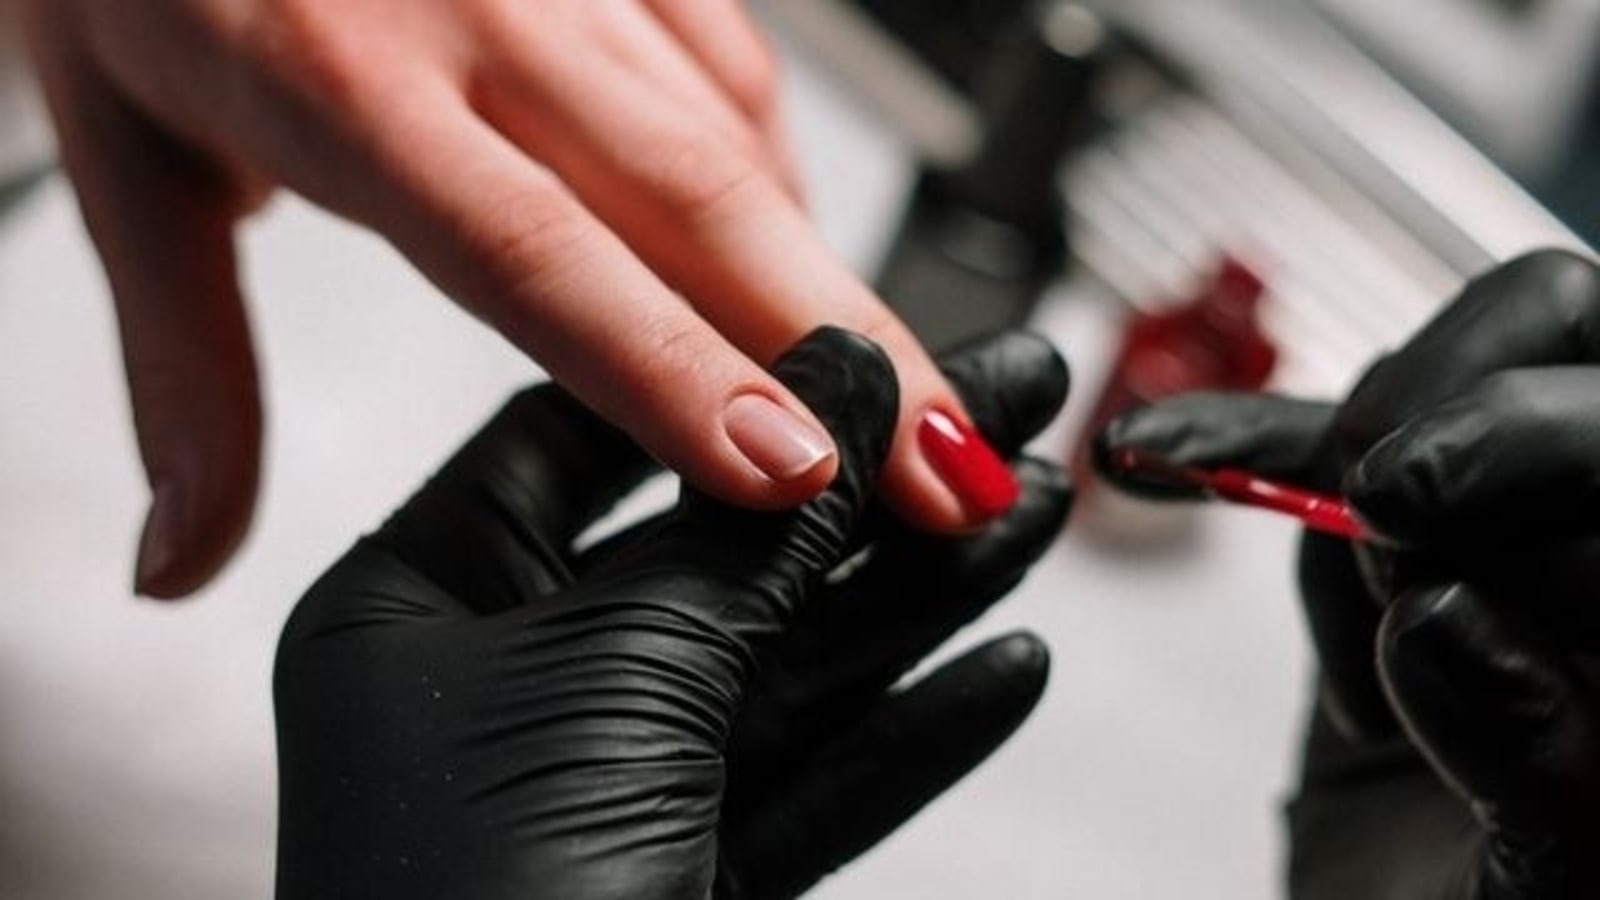 Nail Extensions Guide: Types and Styles for Every Occasion - Urban Culture